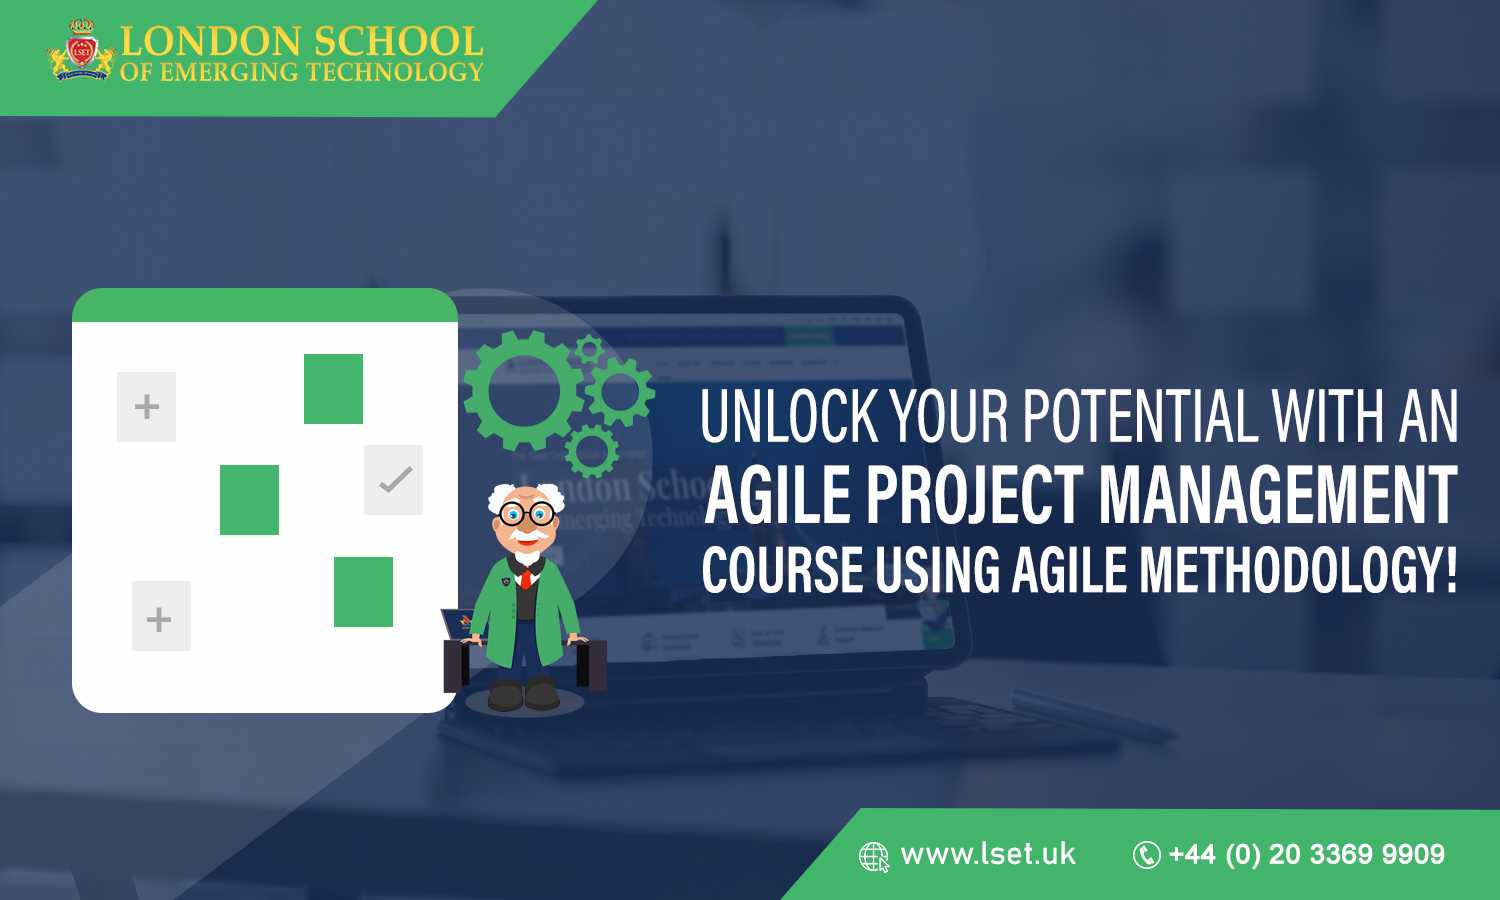 Unlock Your Potential with an Agile Project Management Course Using Agile Methodology!